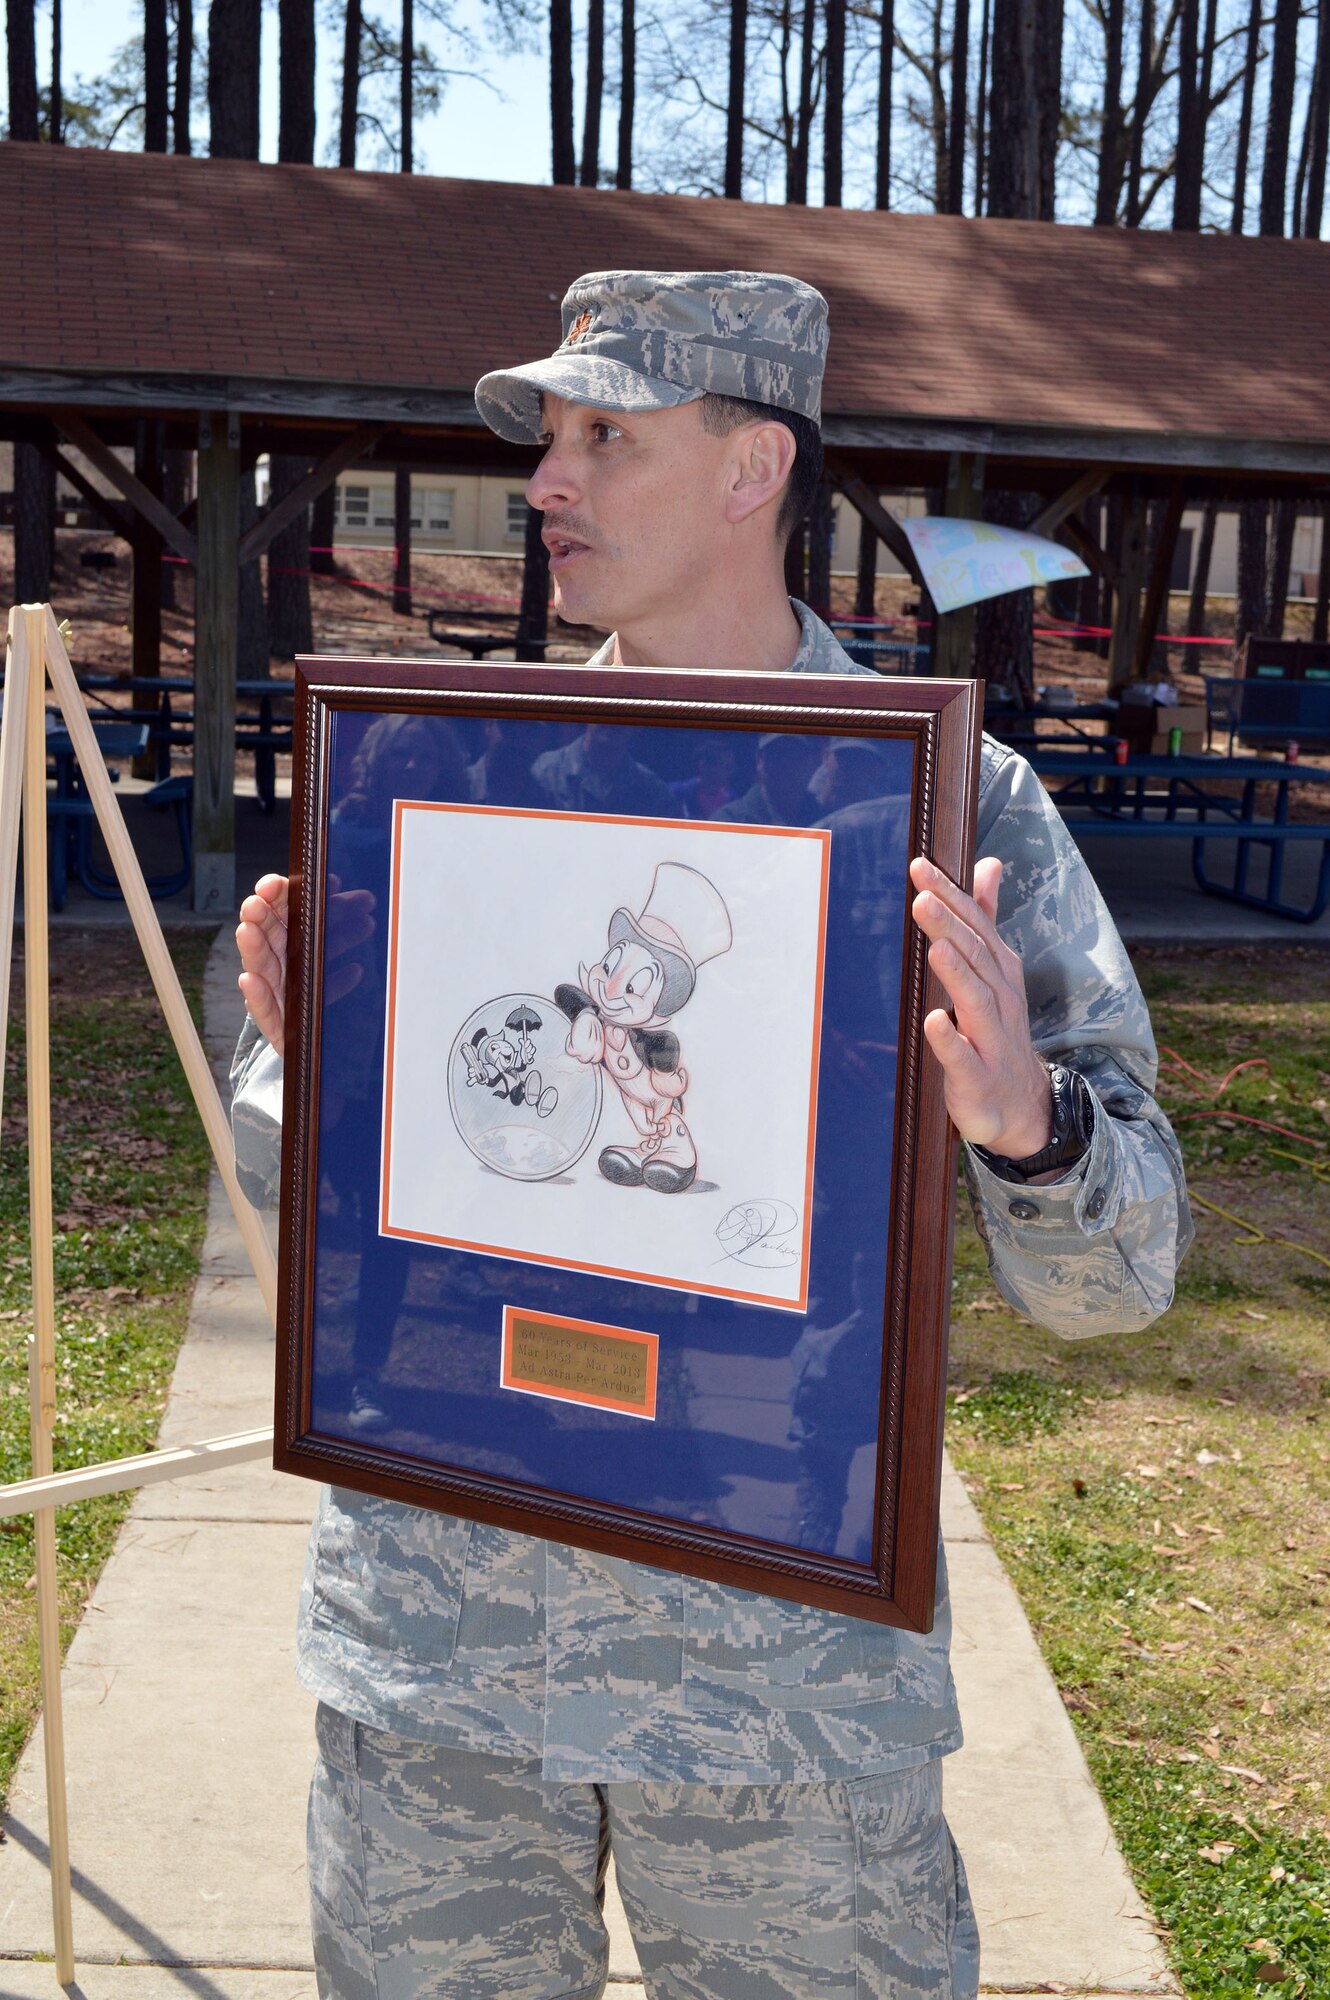 Maj. Joseph Whittington, 3rd Aerial Port Squadron commander, unveils an original Disney caricature drawing of the squadron's mascot, Jiminy Cricket, during a picnic March 29, celebrating the squadron's 60th Anniversary at Pope Army Airfield, Fort Bragg, N.C.
